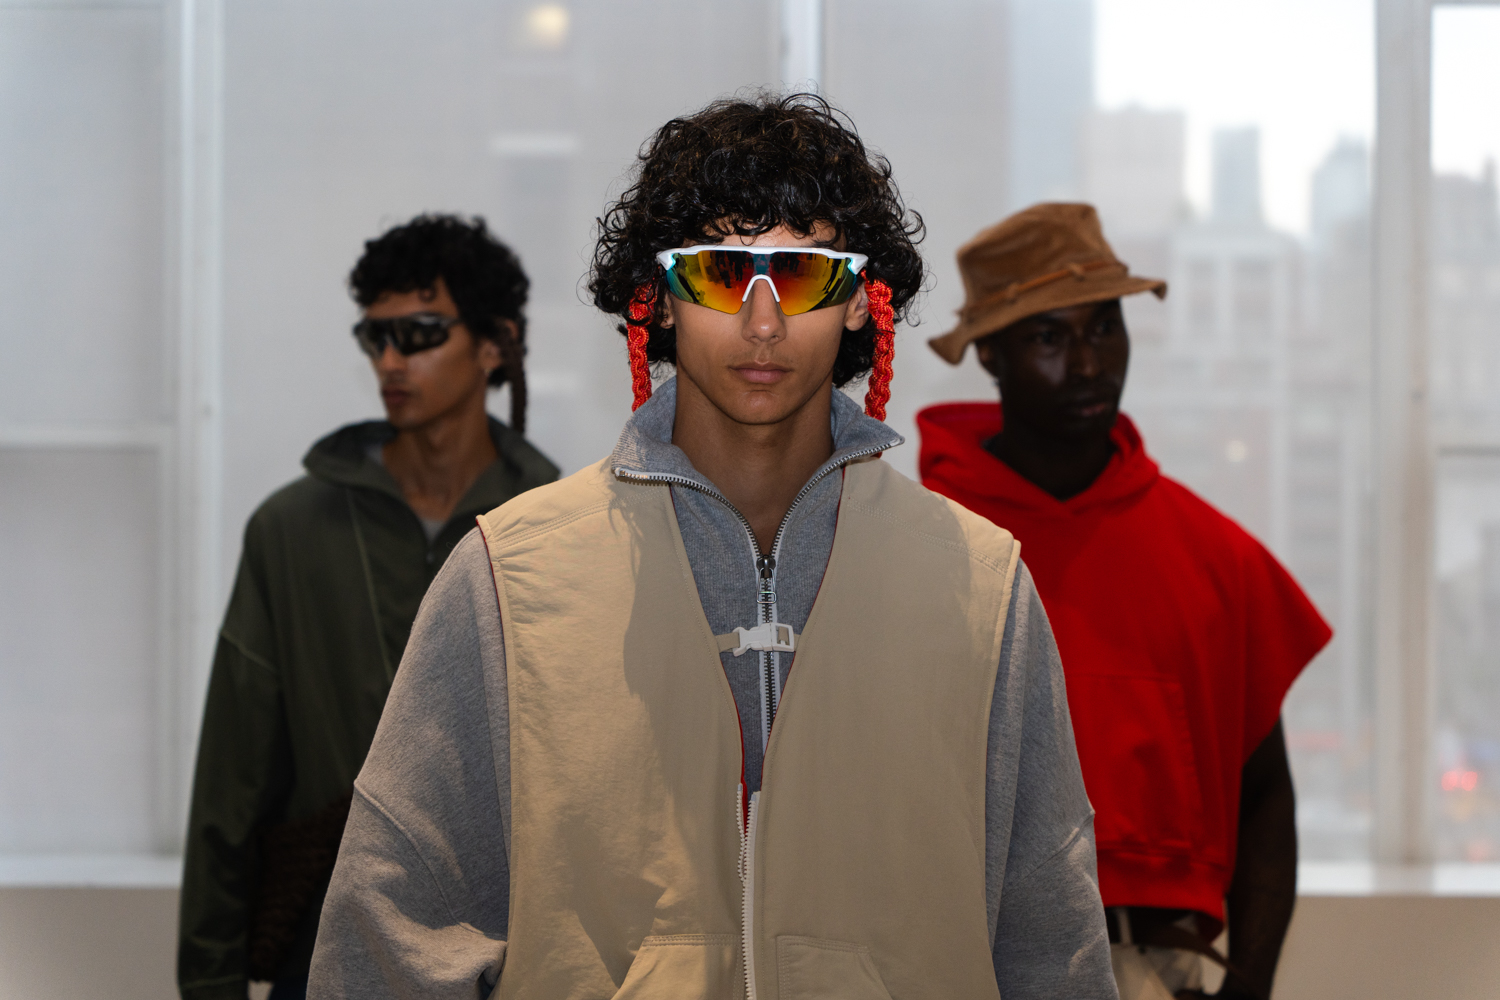 A model wearing reflective sunglasses, a gray jacket and a beige vest stands in a fashion showroom. Behind the model are two other models. They are wearing clothing from the brand SEBASTIEN AMI.